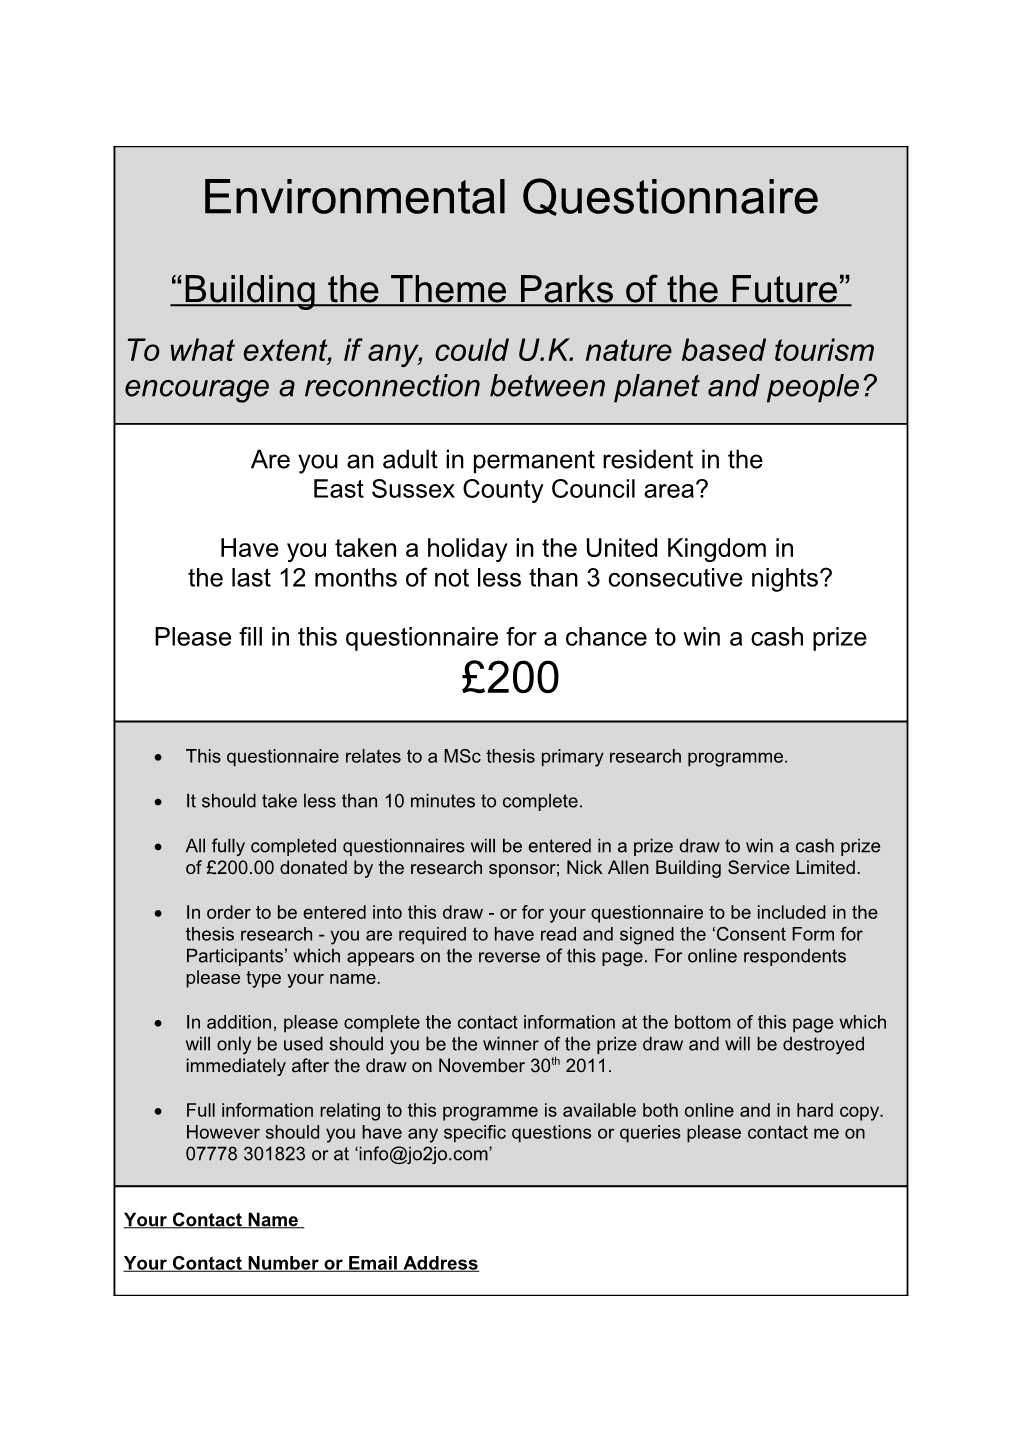 This Questionnaire Relates to a Msc Thesis Primary Research Programme